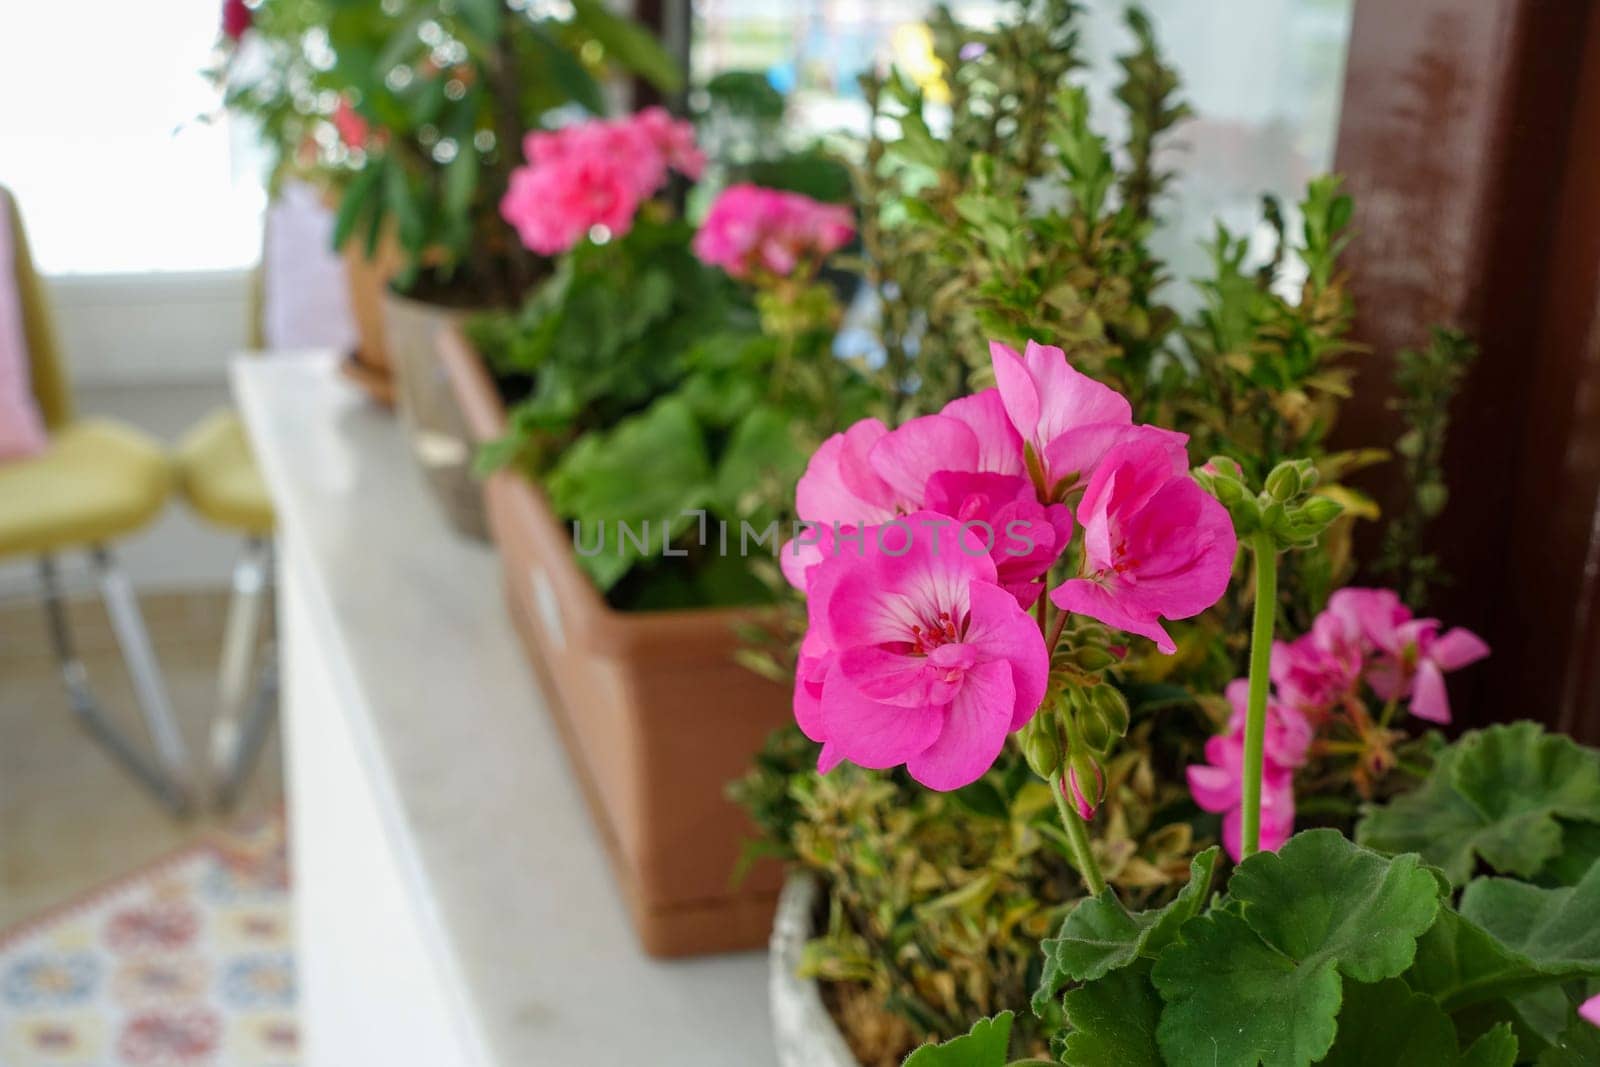 geranium flower in flower pot, pink and red blooming geranium plant, by nhatipoglu